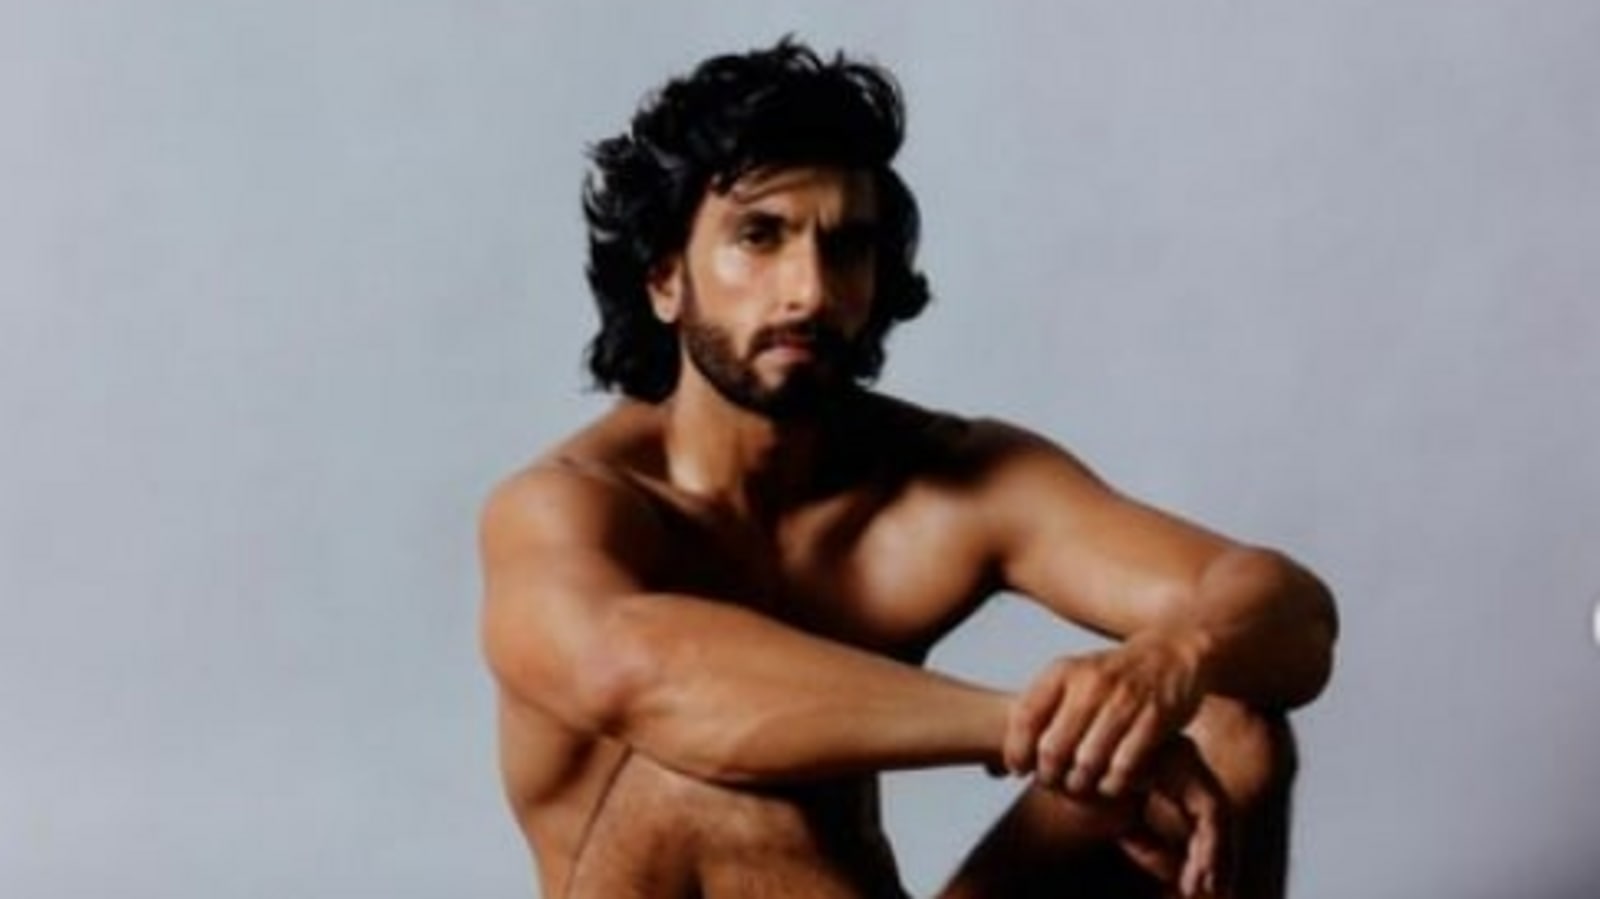 FIR filed against Ranveer Singh for nude photoshoot Bollywood pic